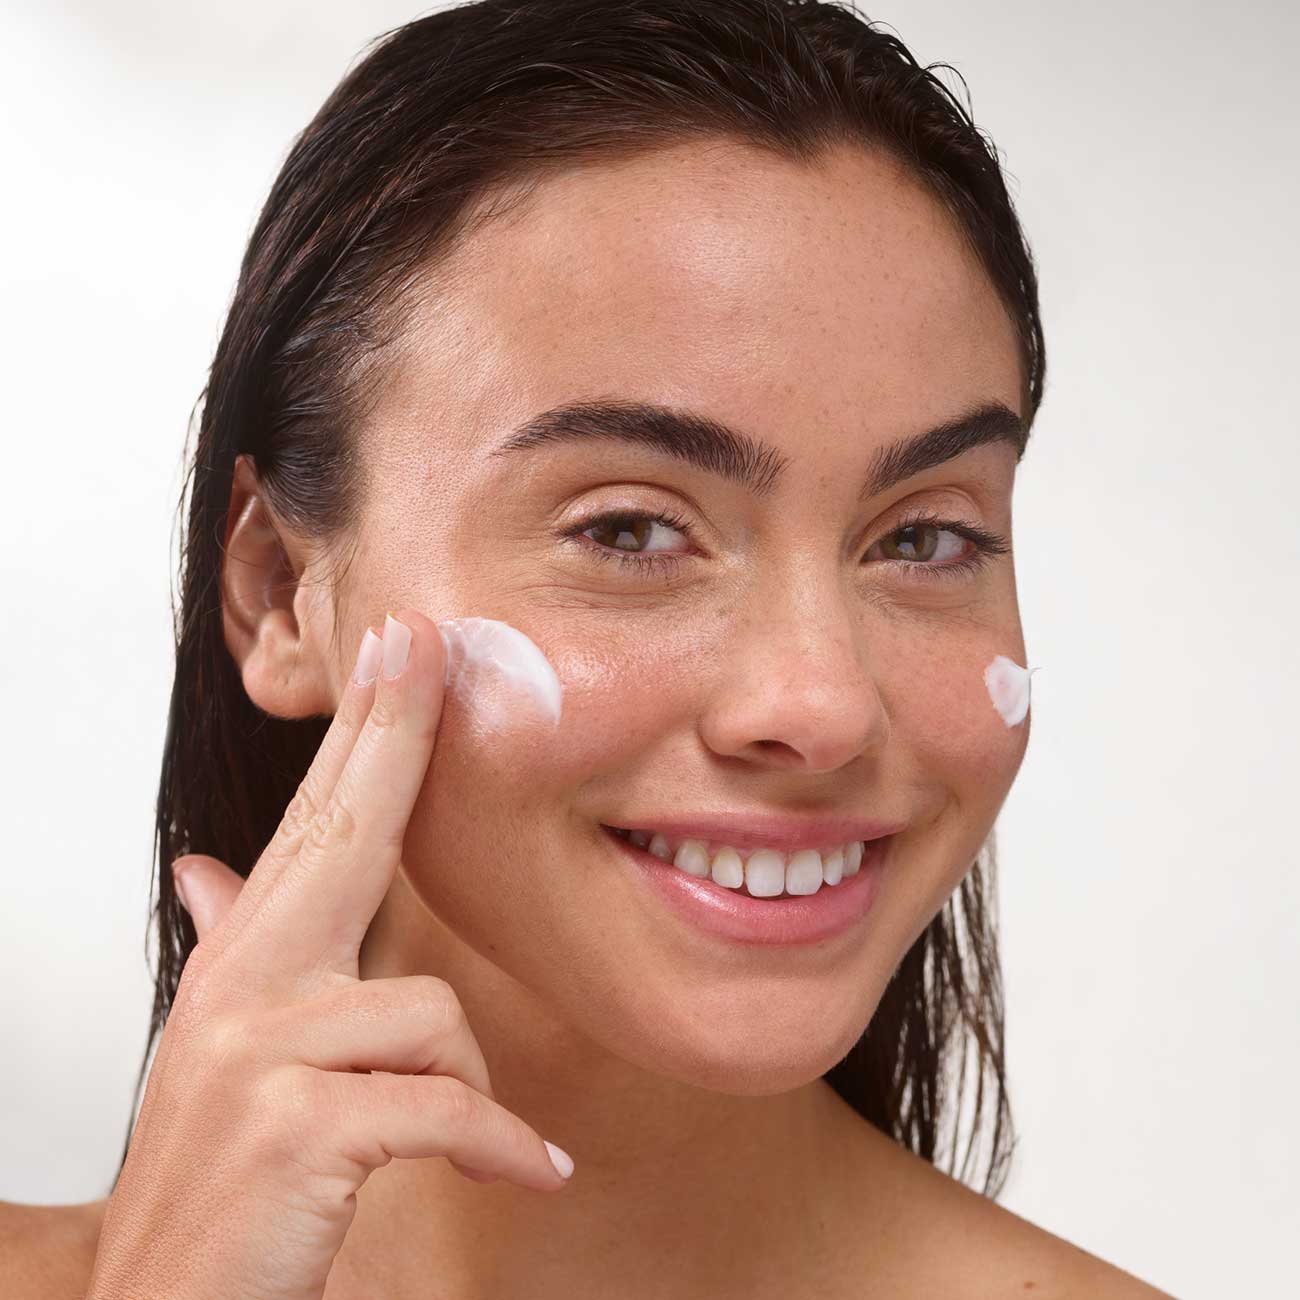 Woman happily applying daily dose of LightWater PM Replenishing Cream on face